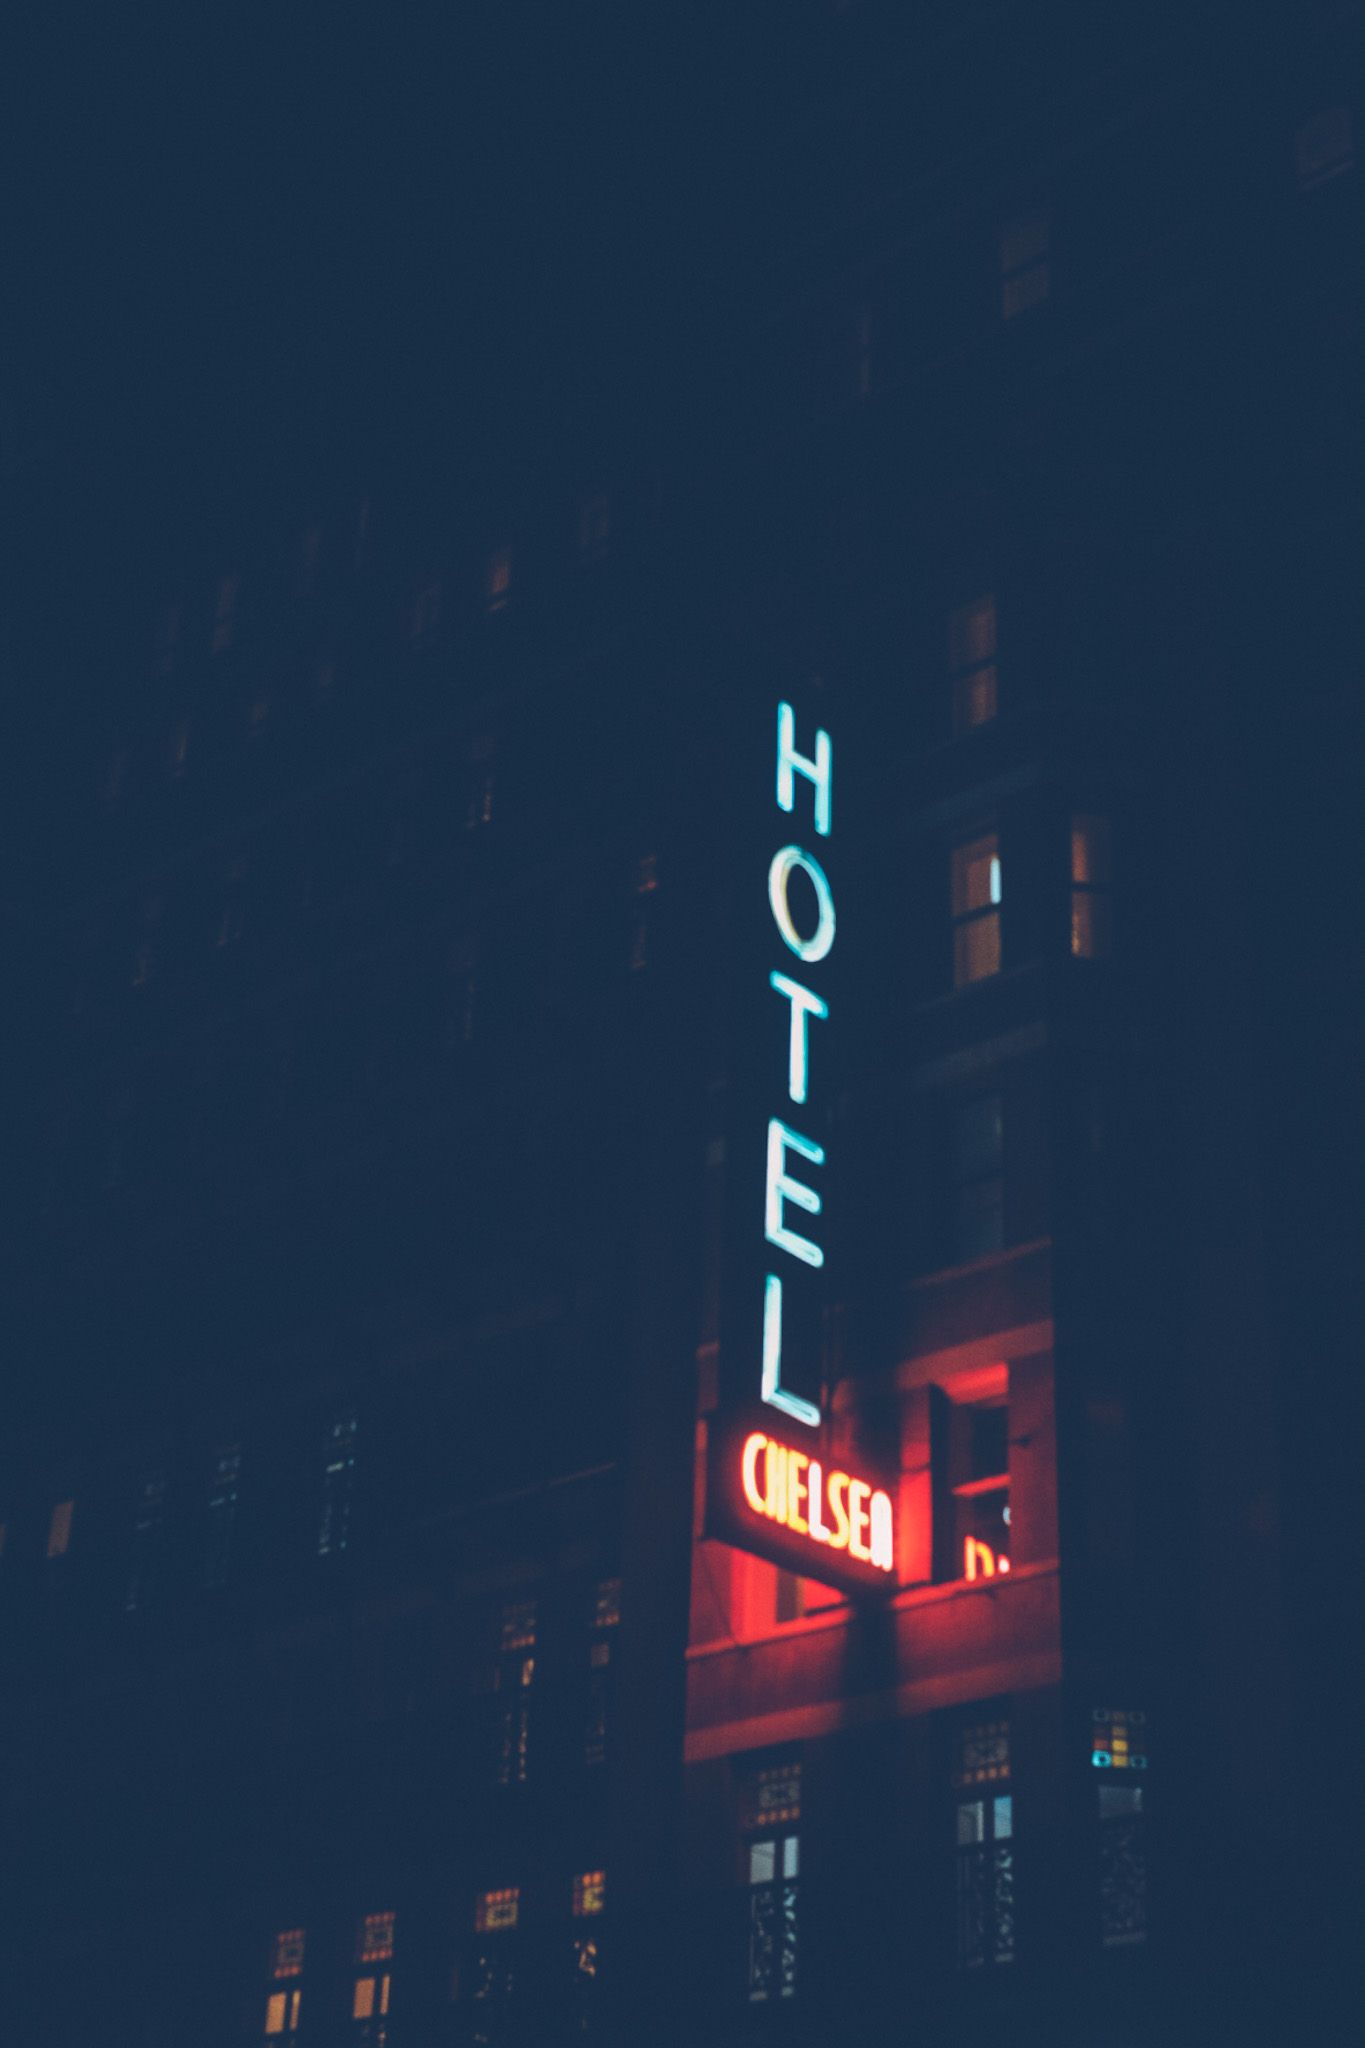 A neon sign saying “Hotel Chelsea” glows in the night, apartment windows lit behind it.